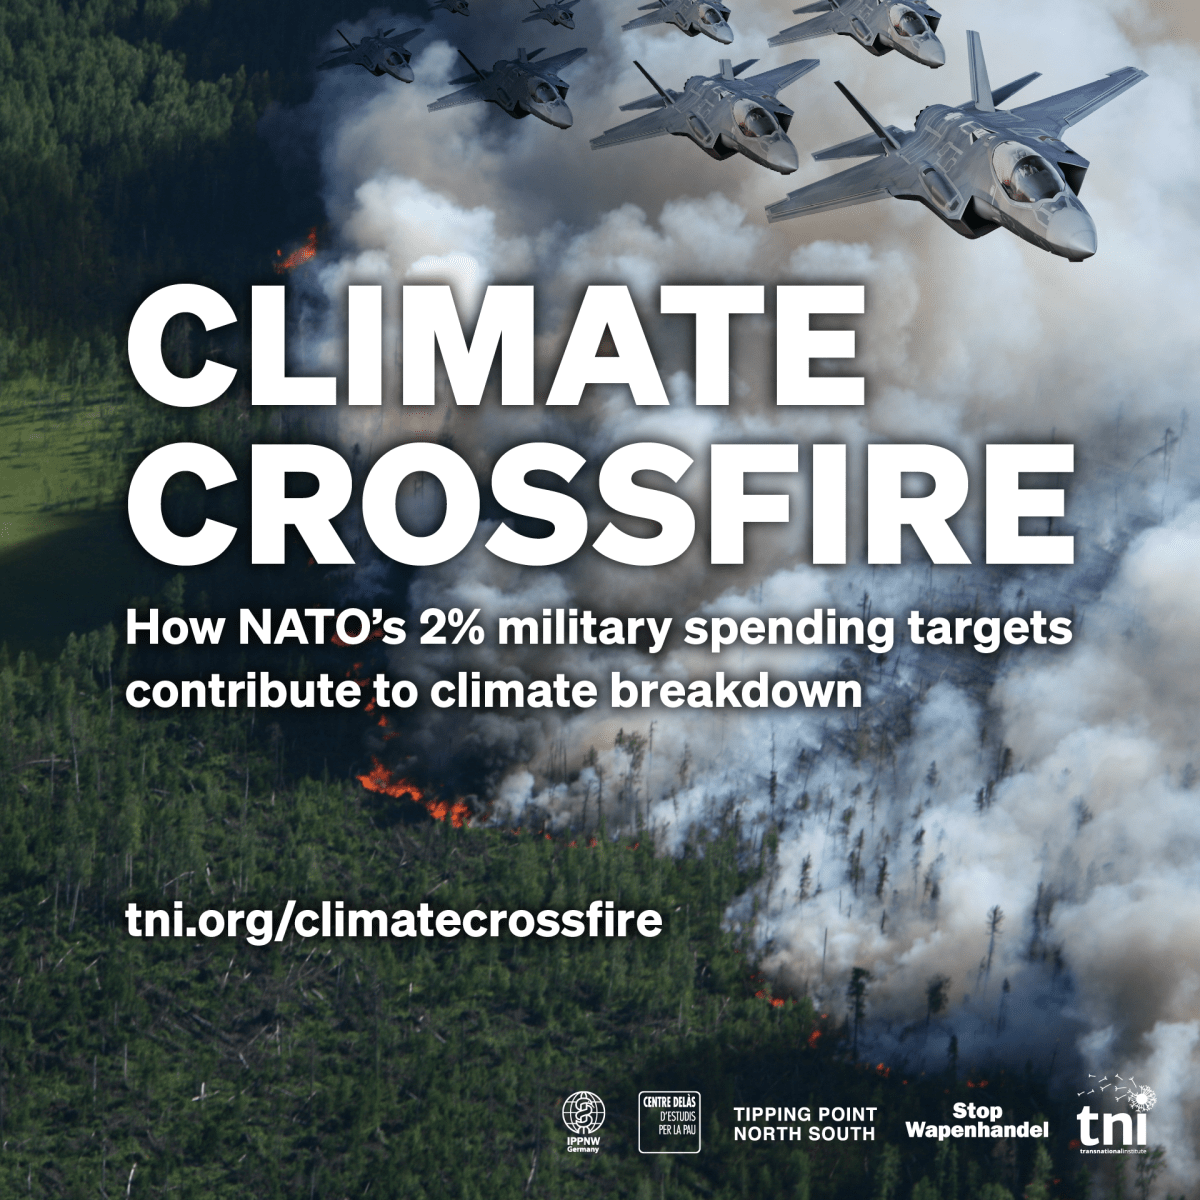 New Briefing on NATO’s Climate Impact: A Must-Read